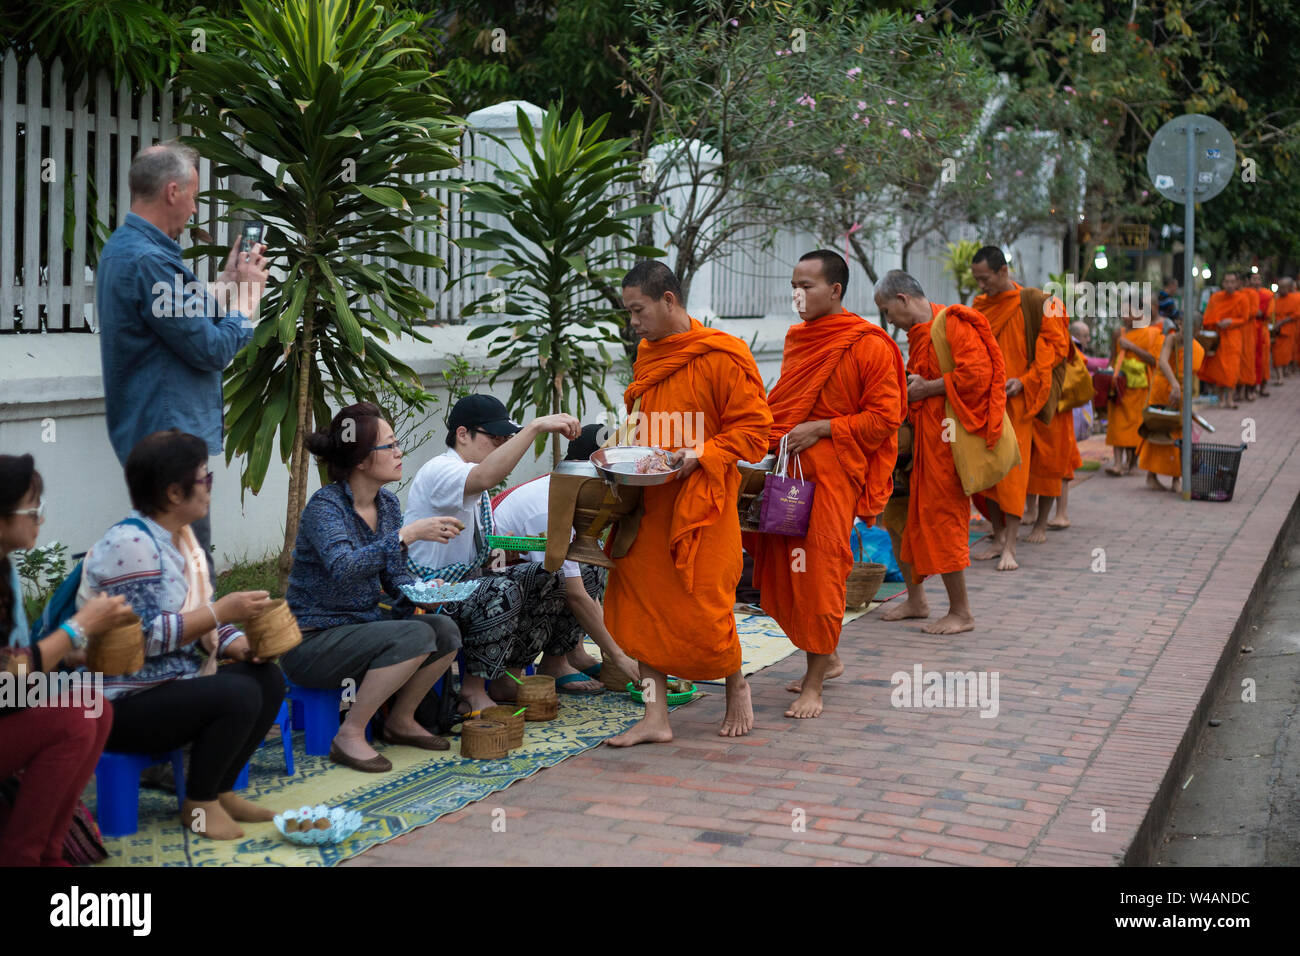 People giving alms to Buddhist monks on the street early in the morning in Luang Prabang, Laos. The ritual is called Tak Bat. Stock Photo